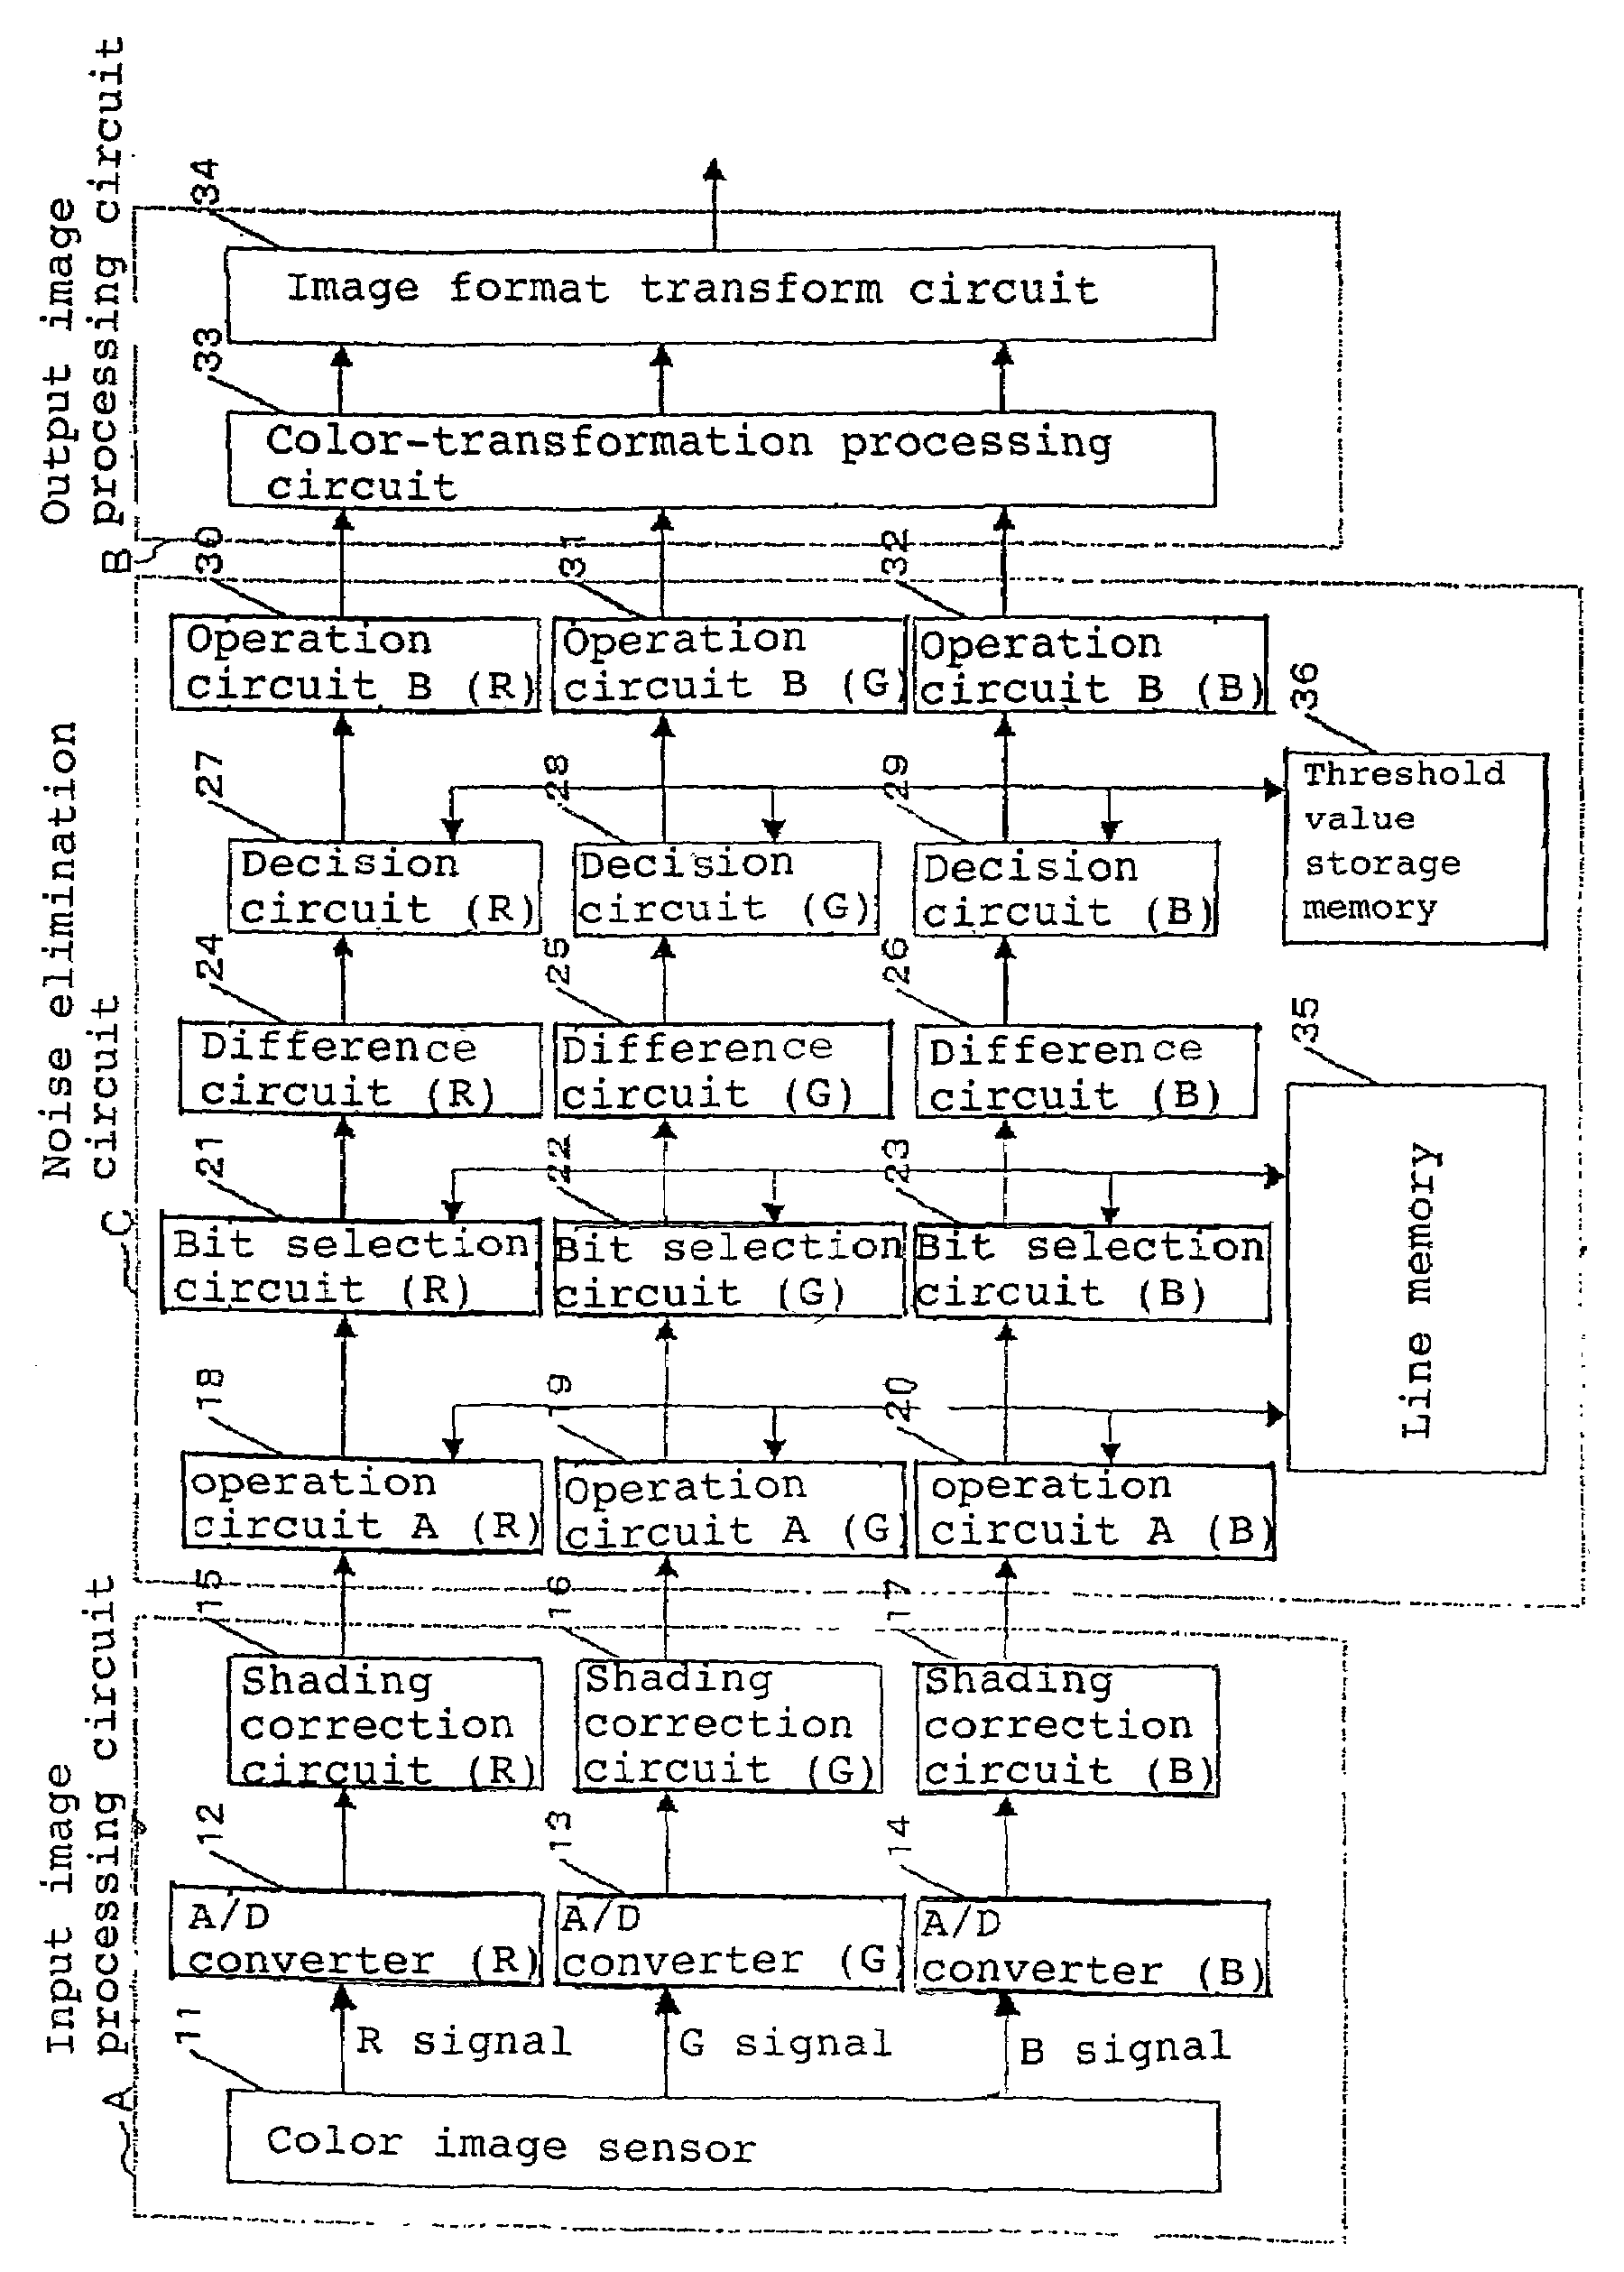 Color image processing apparatus executing moving-average processing for noise reduction in color image signals